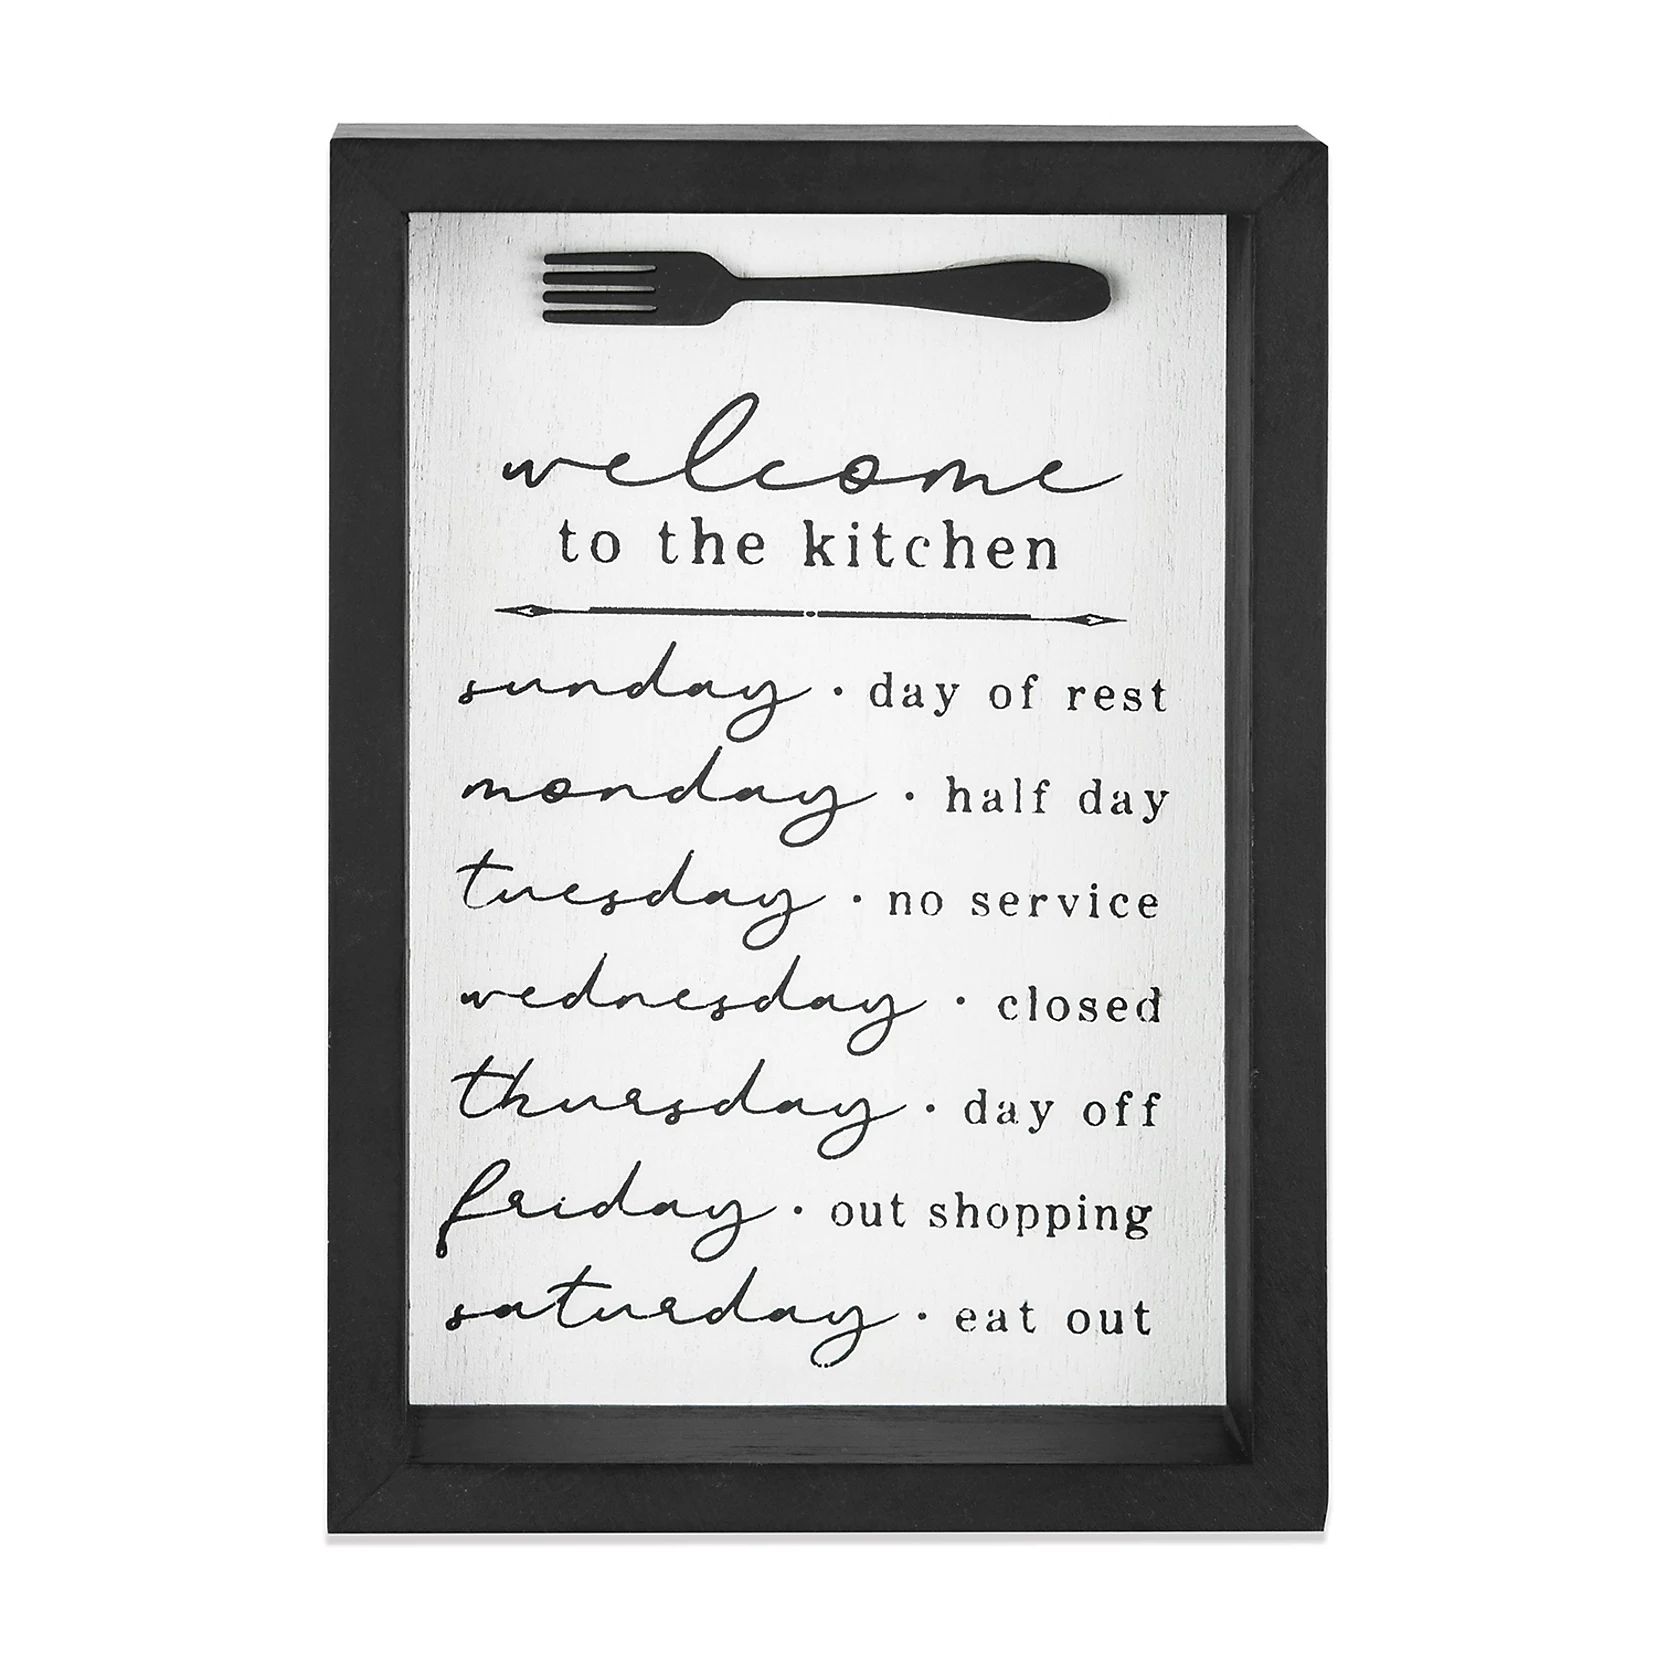 Belle Maison Welcome to The Kitchen Box Sign Table Decor | Kohl's